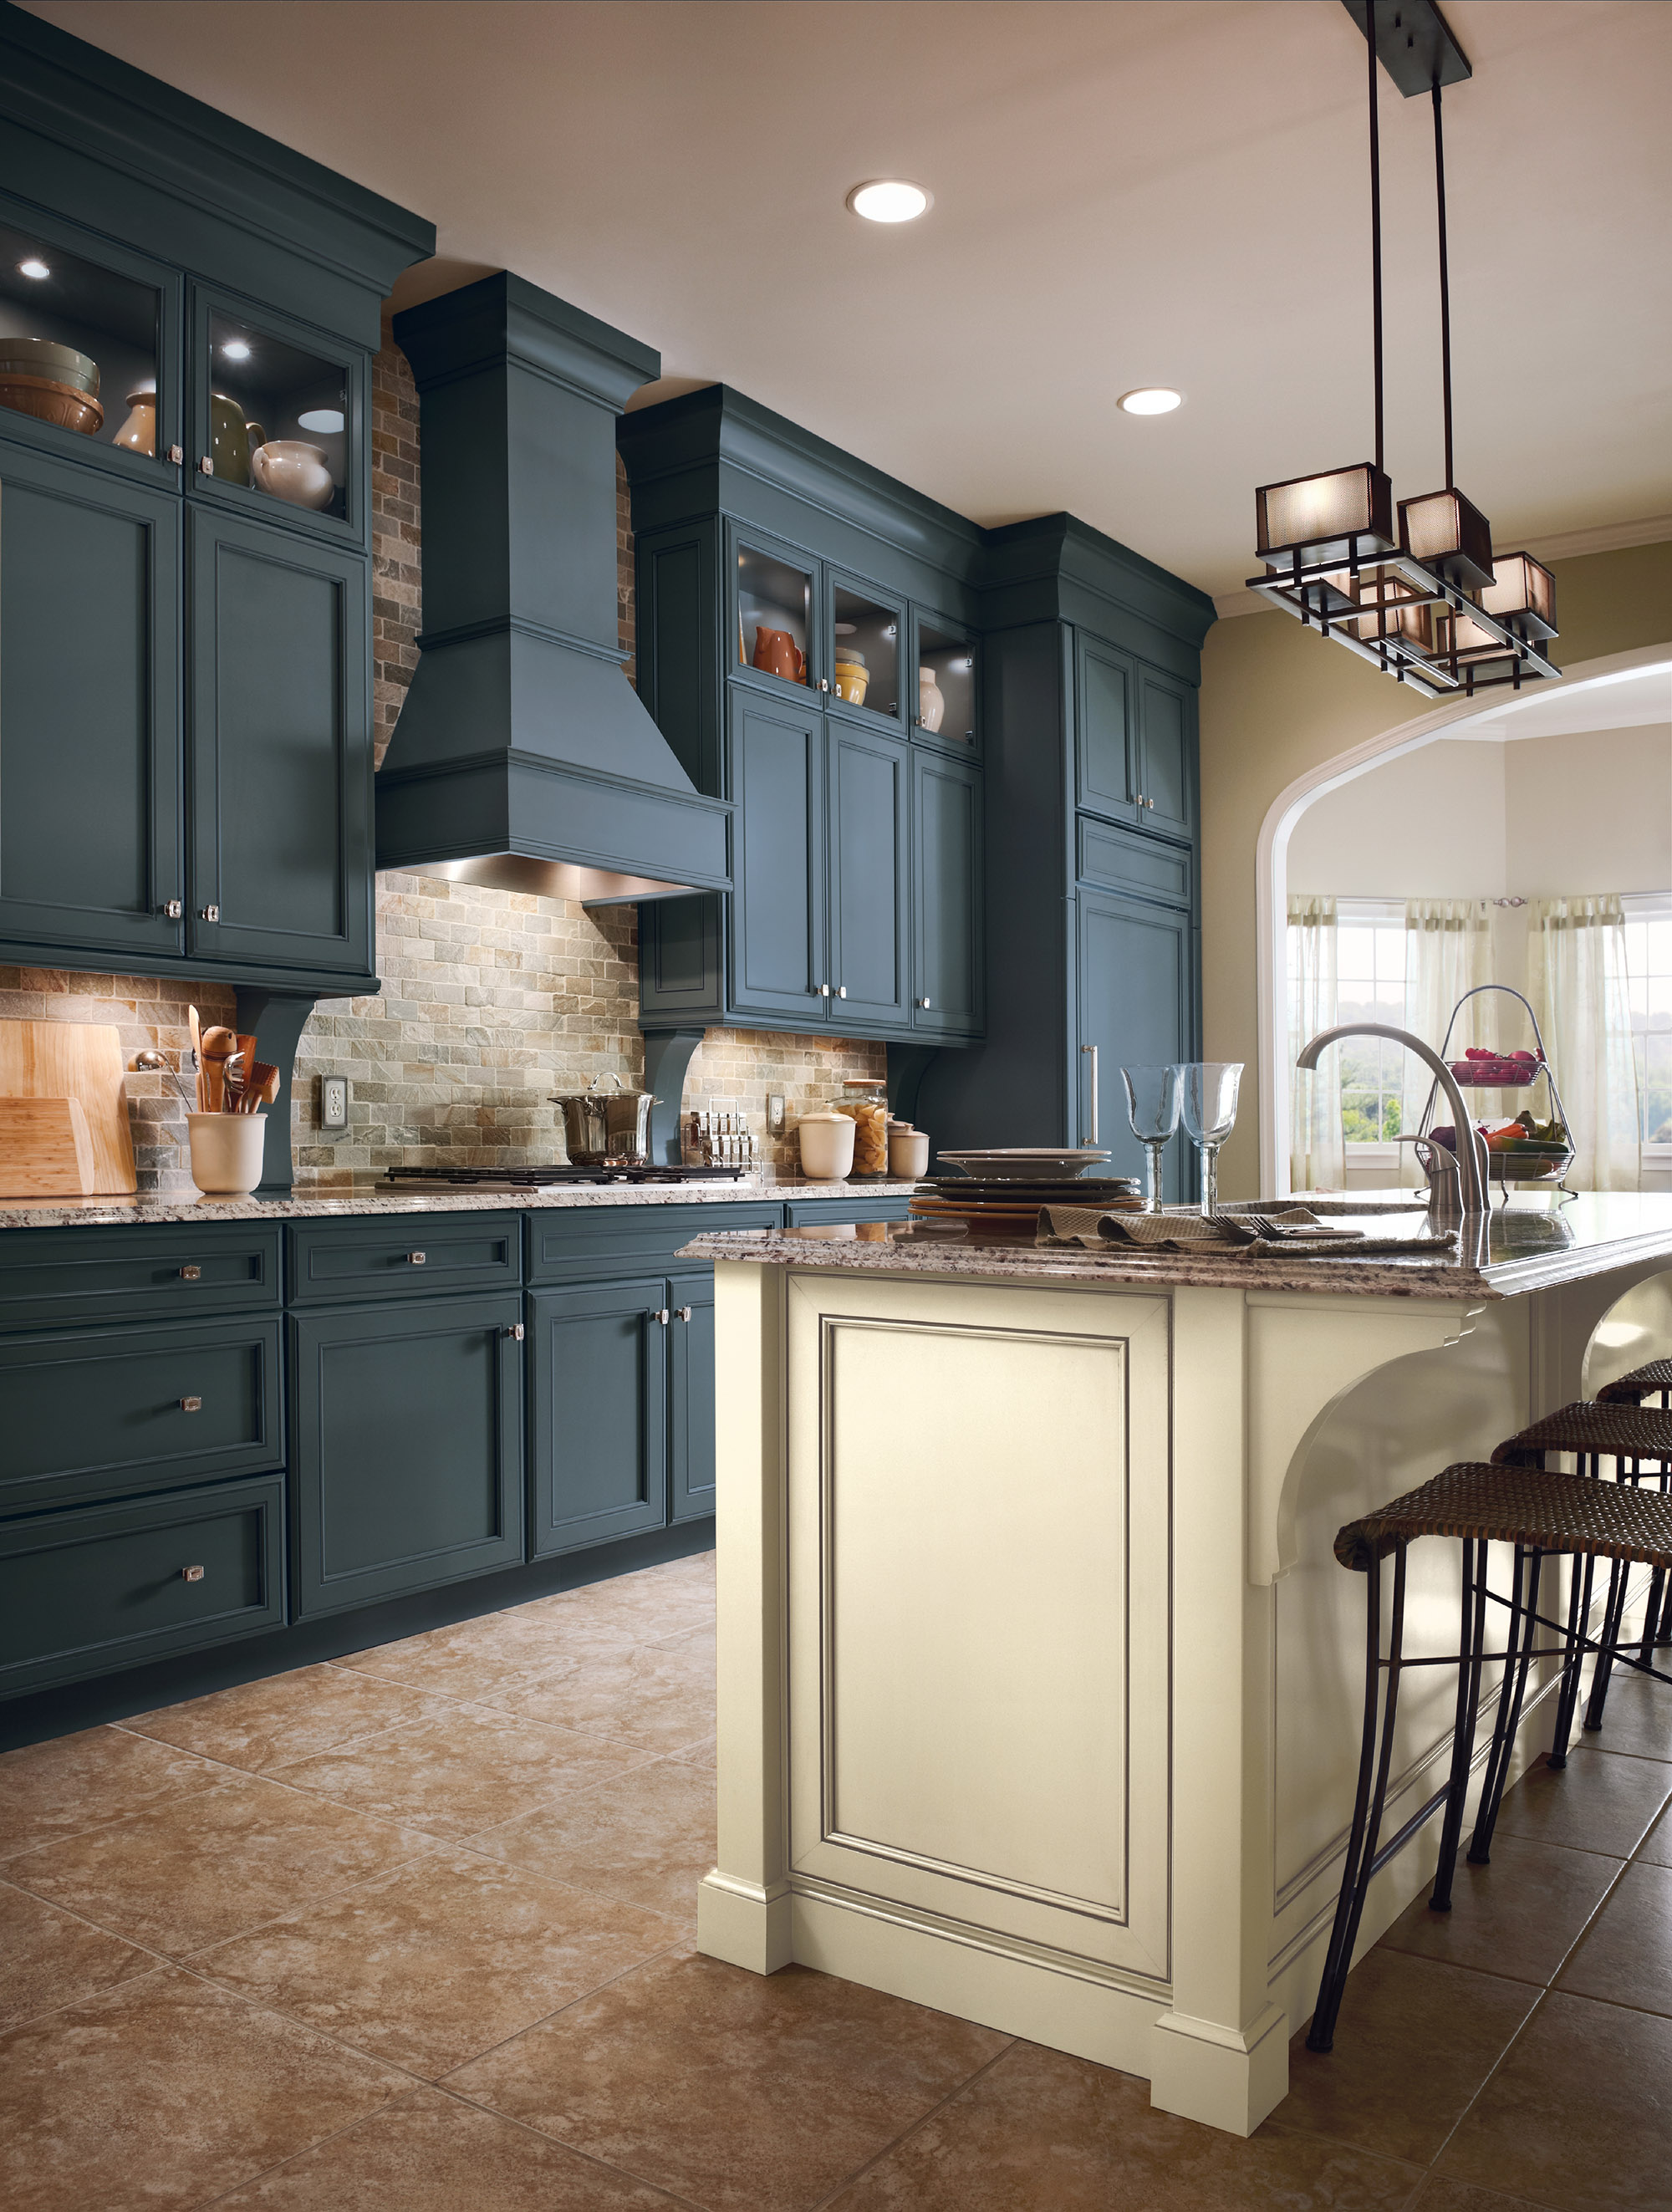 Kraftmaid Kitchen Of The Year, How Much Does Kraftmaid Cabinets Cost